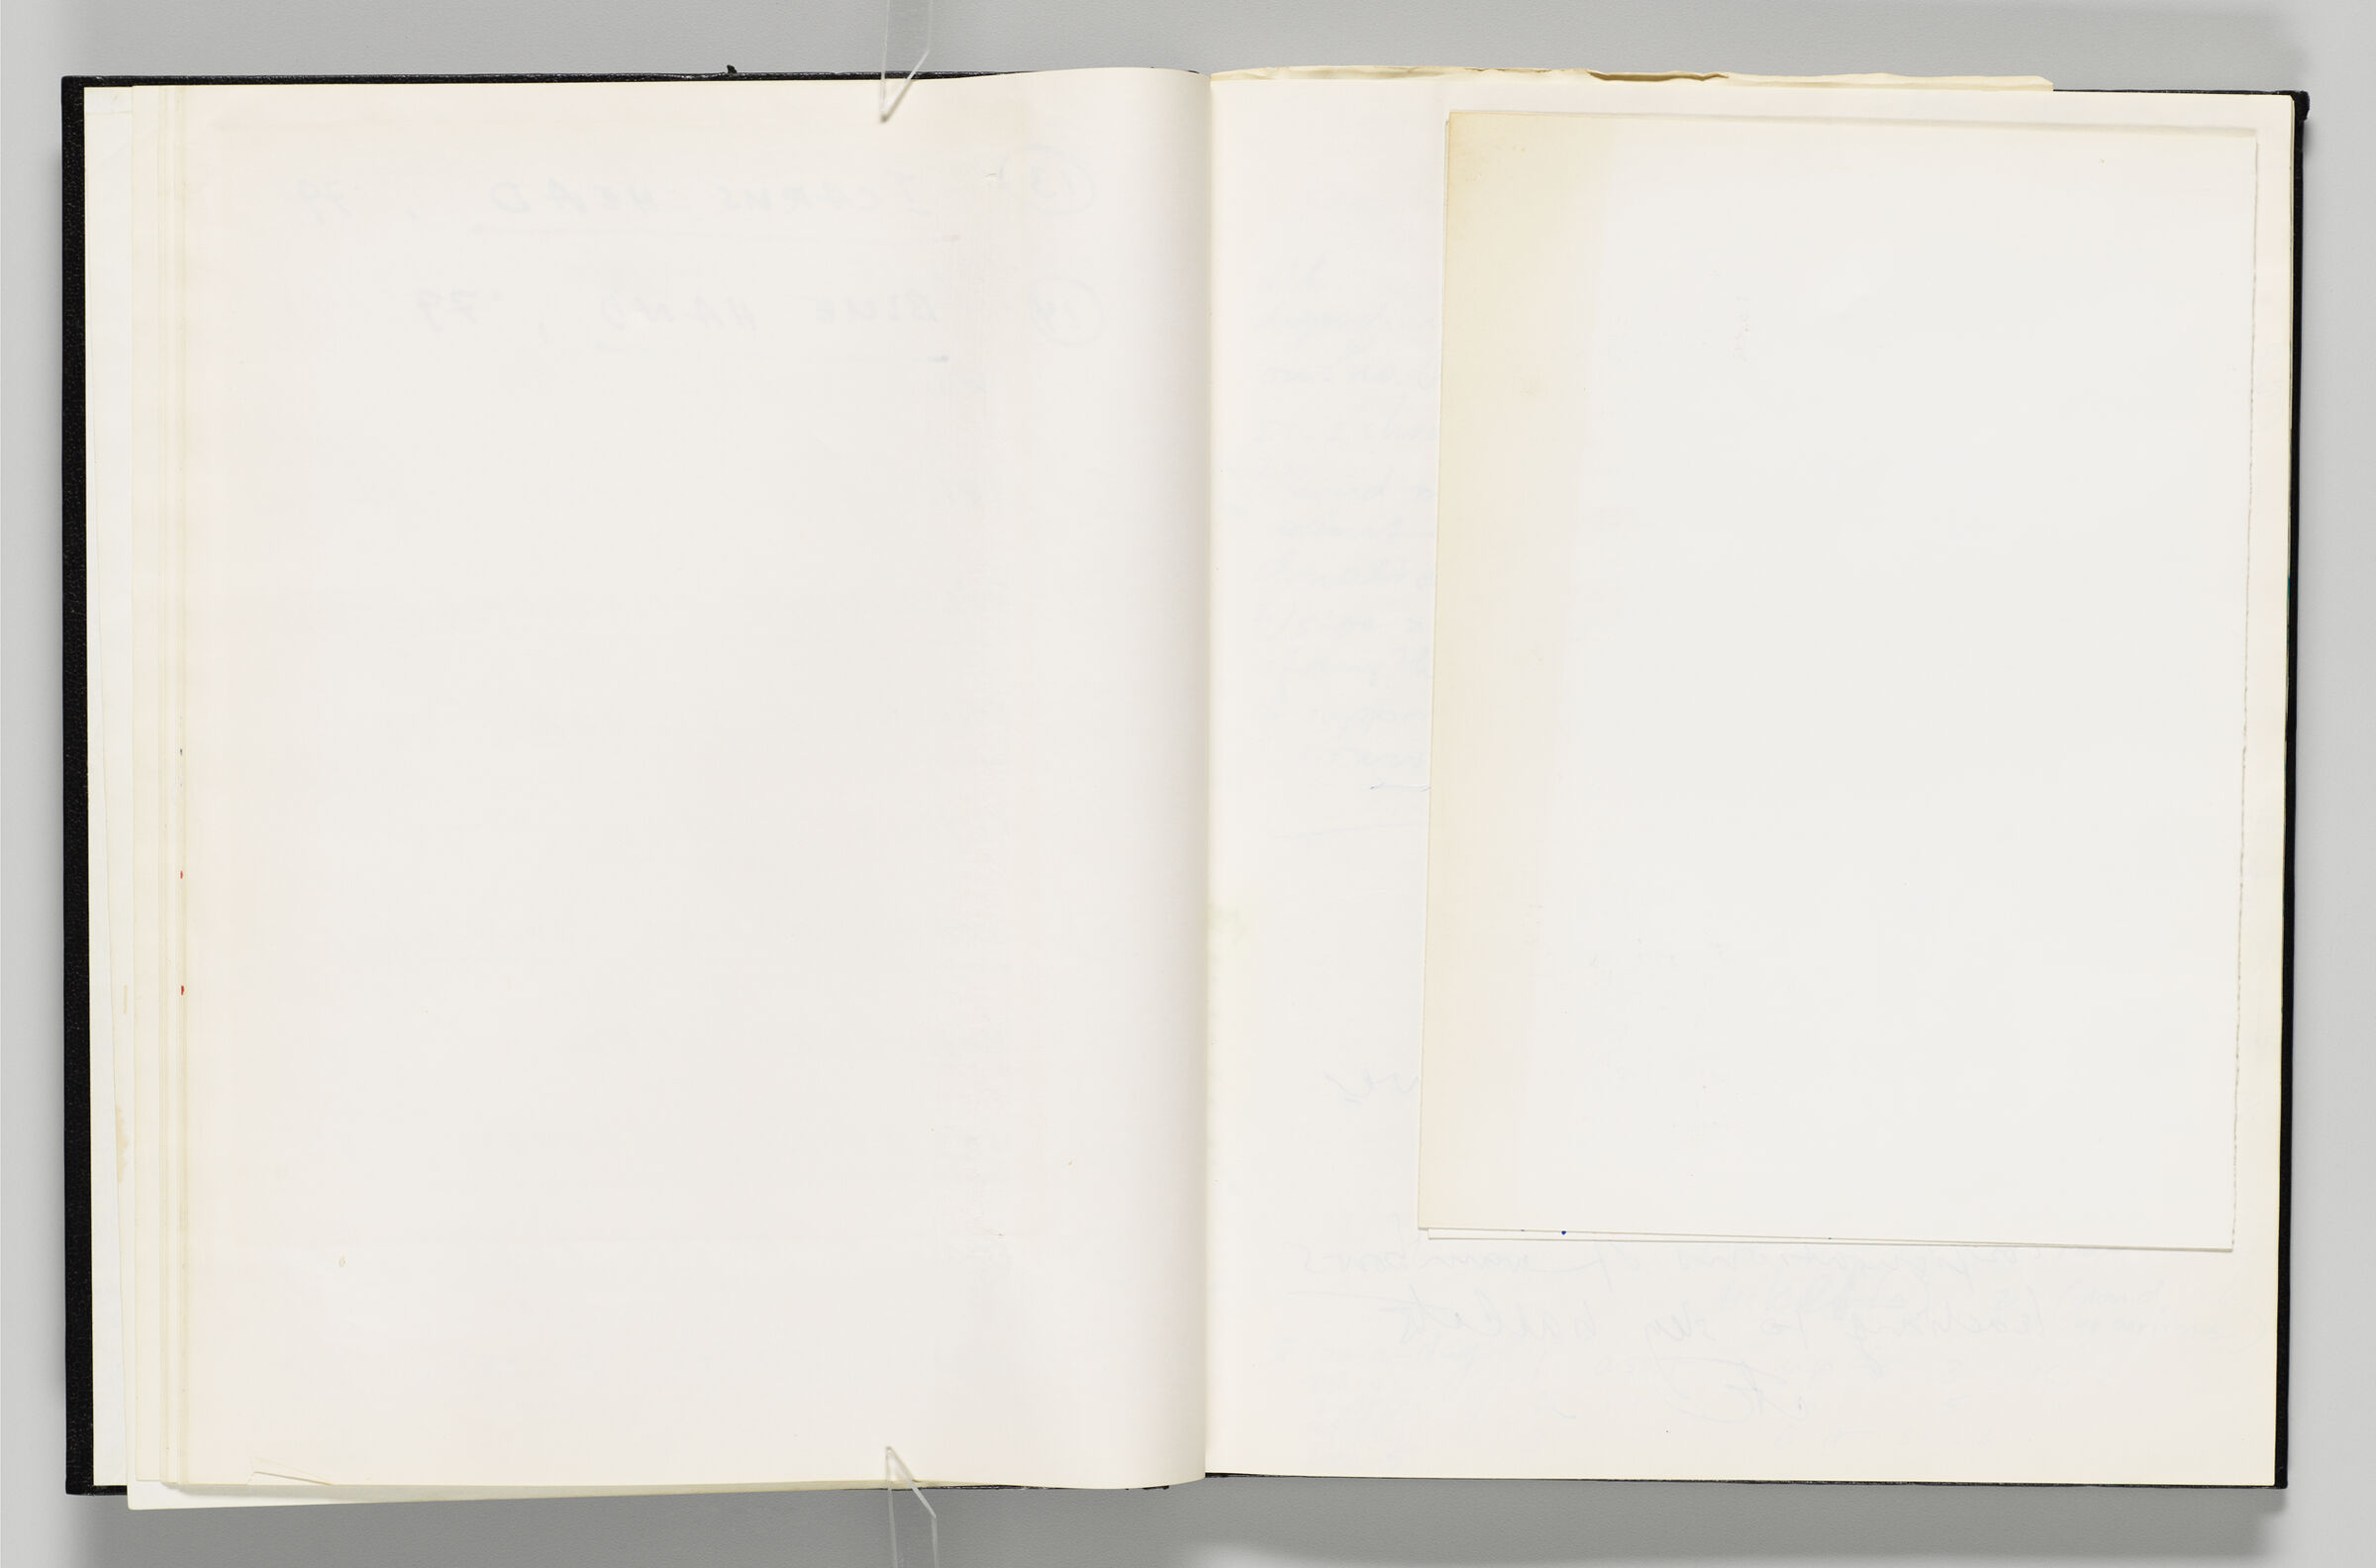 Untitled (Blank, Left Page); Untitled (Pasted-In Notes, Right Page)